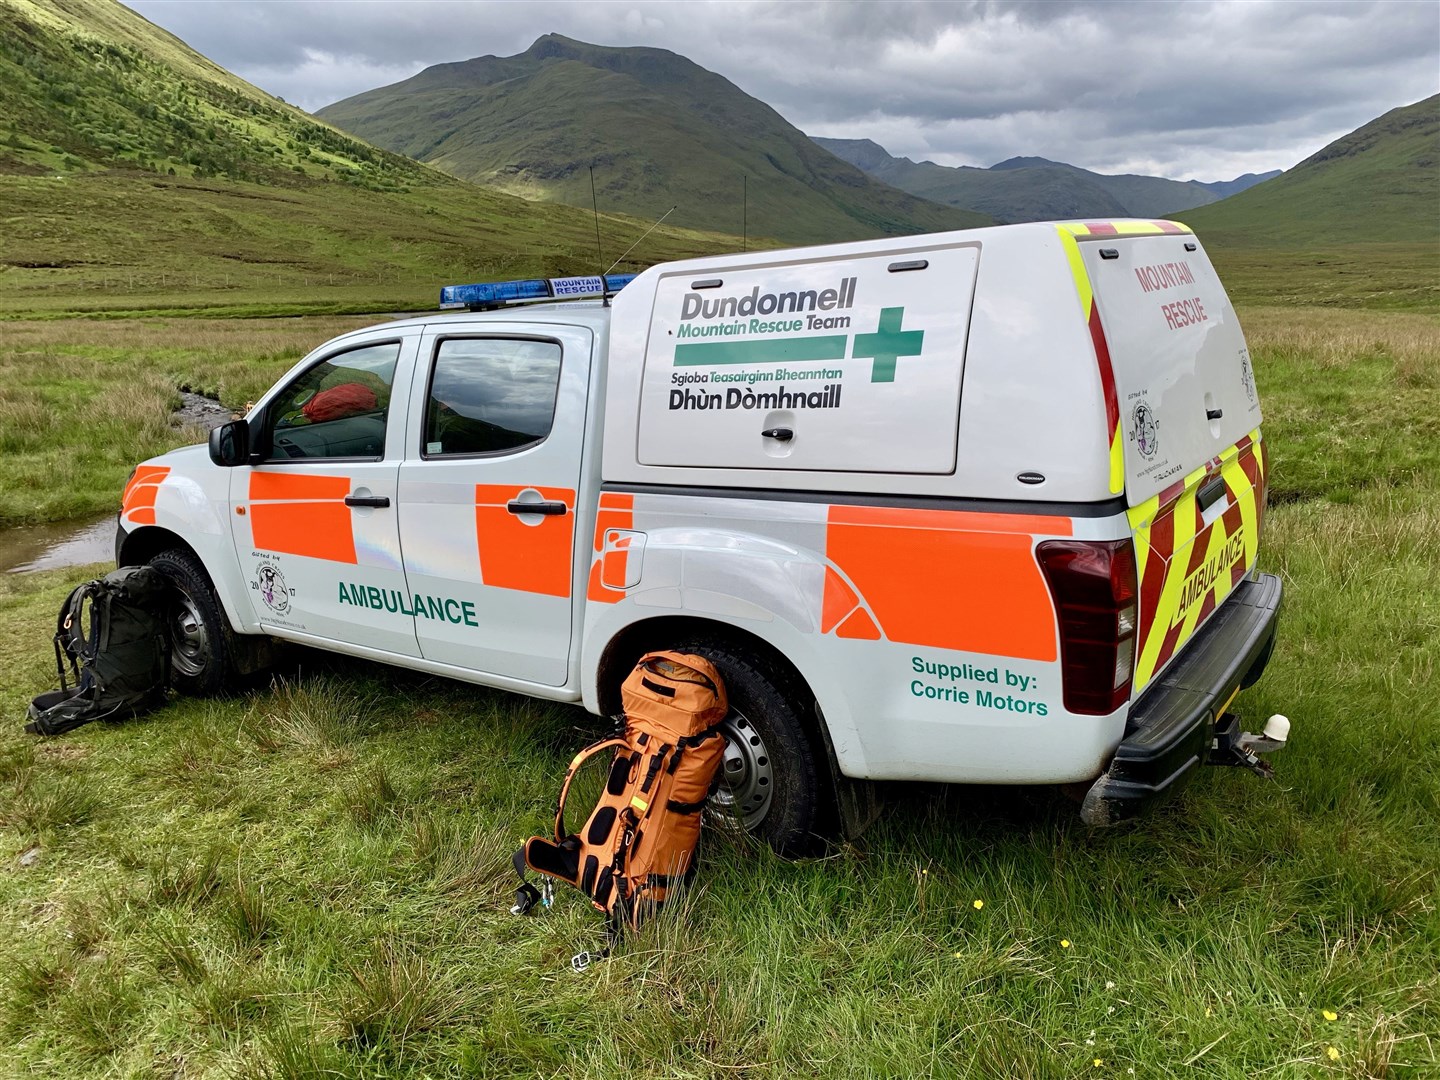 Dundonnell Mountain Rescue Team covers some of the remotest areas in the country.